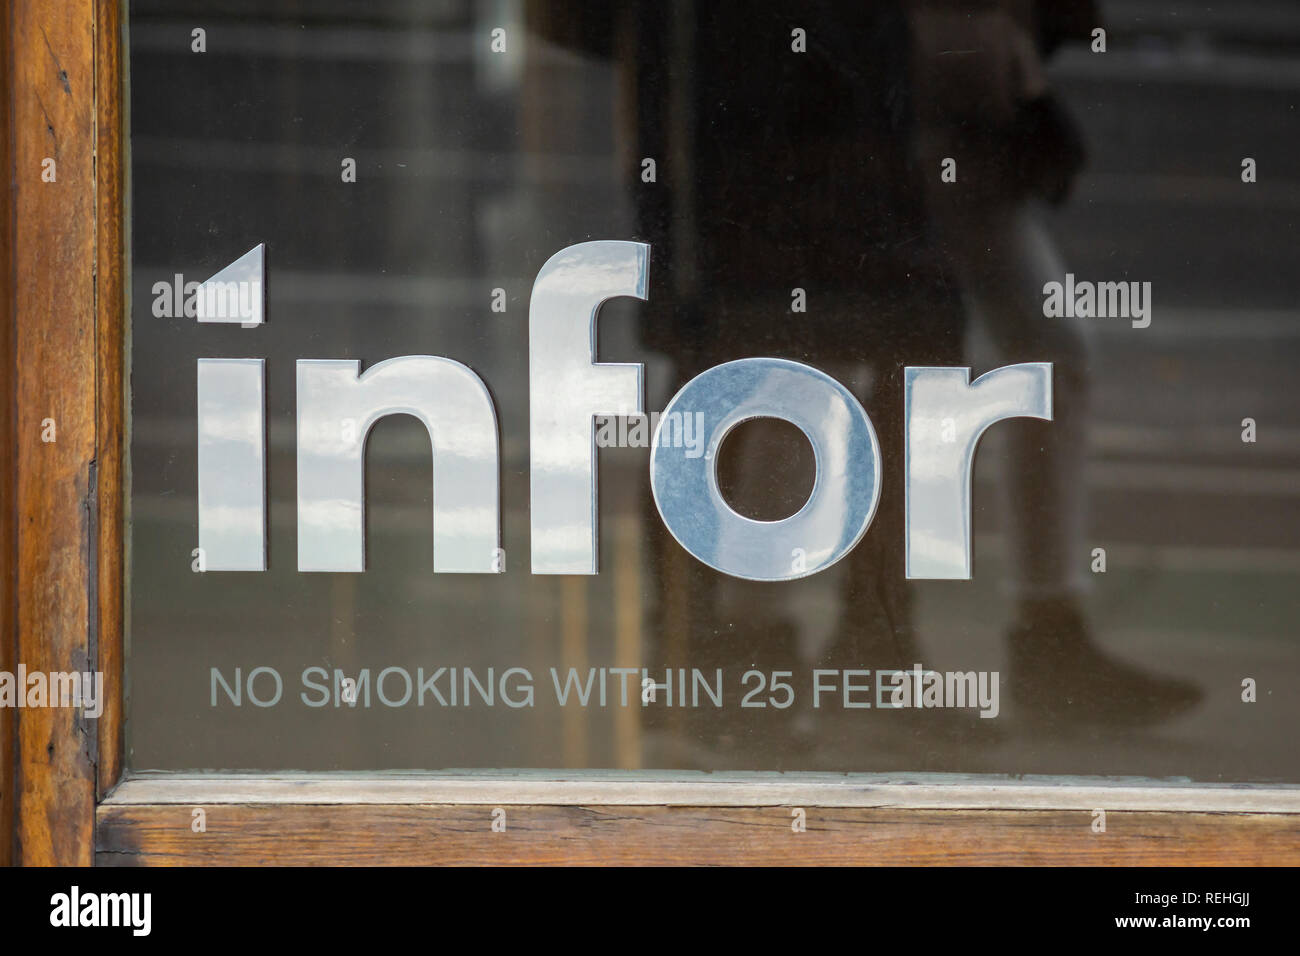 Branding on the exterior of an office building in Chelsea in New York on Wednesday, January 16, 2019 informs that the buildings tenants includes the New York headquarters of the enterprise software company, Infor. Infor announced that it has received a $1.5 billion investment led by Koch Equity Development and Golden Gate Capital, possibly leading up to an IPO within two years. (© Richard B. Levine) Stock Photo